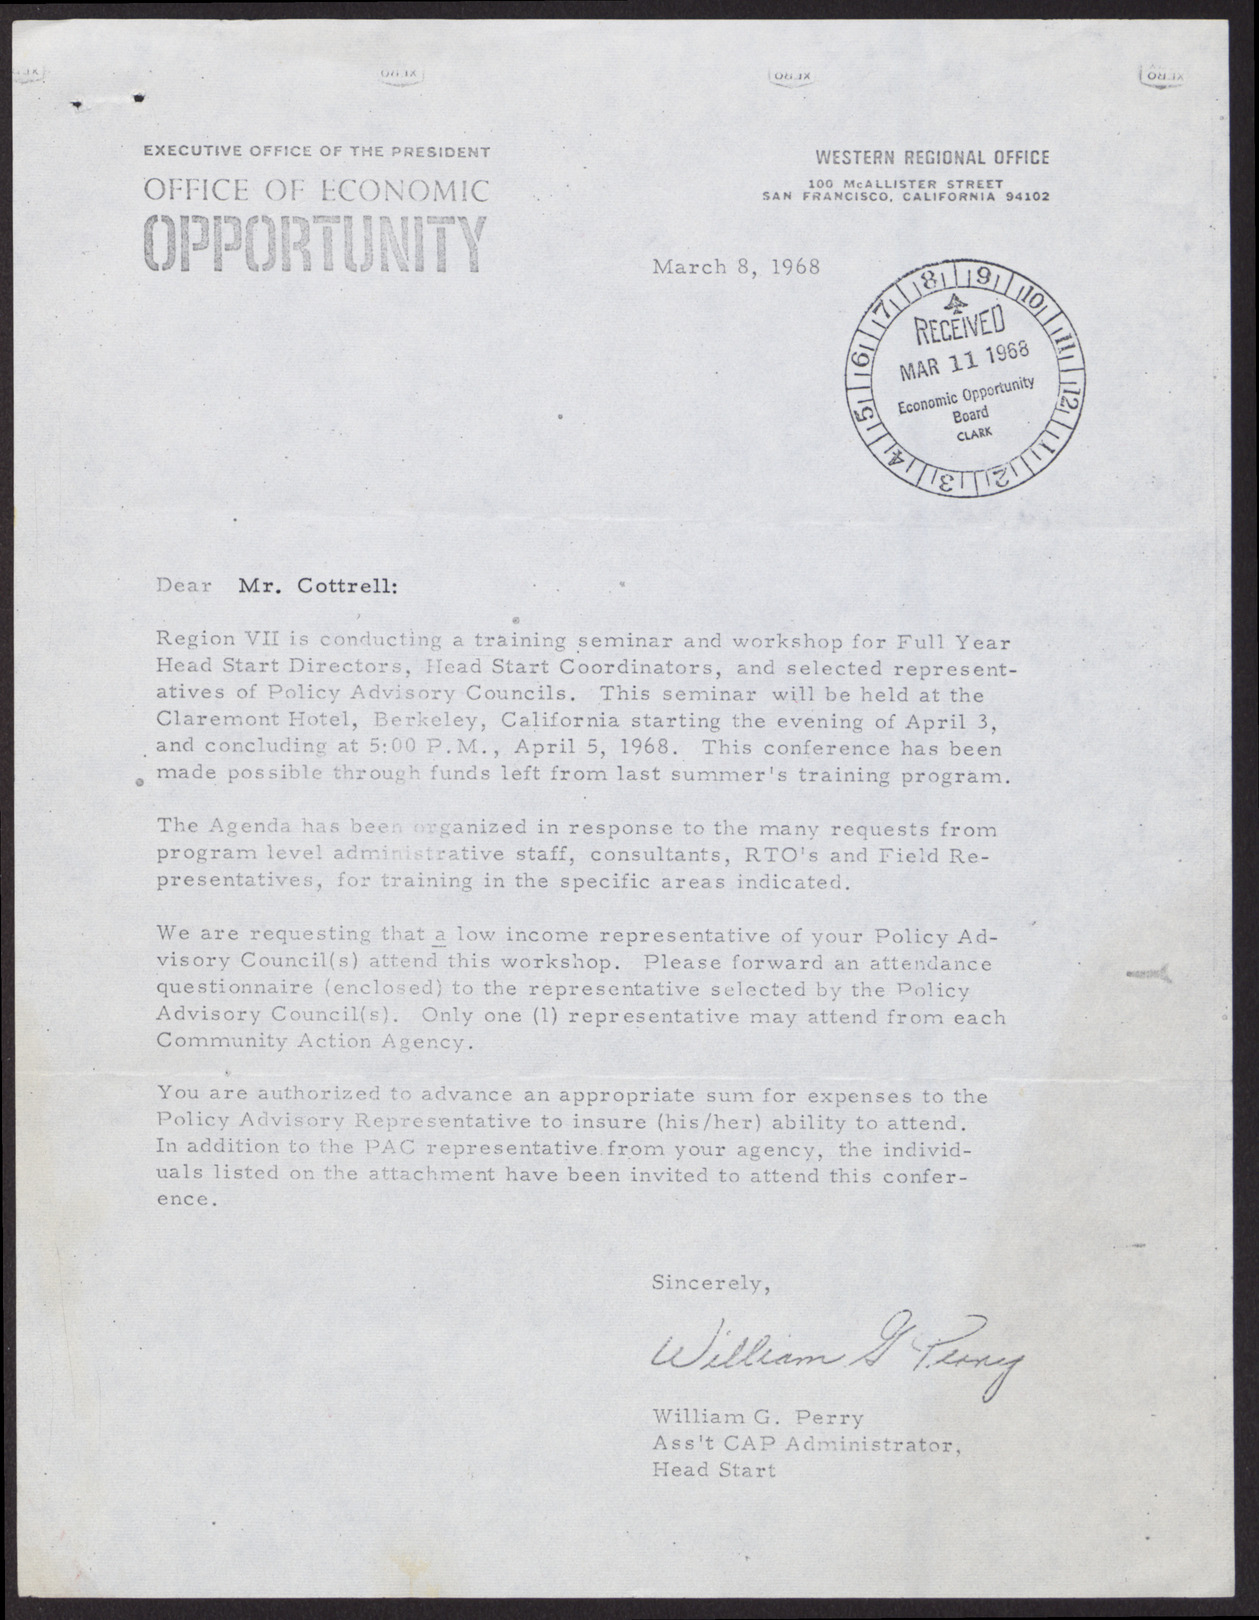 Letter to Mr. Cottrell from William G. Perry, March 8, 1968